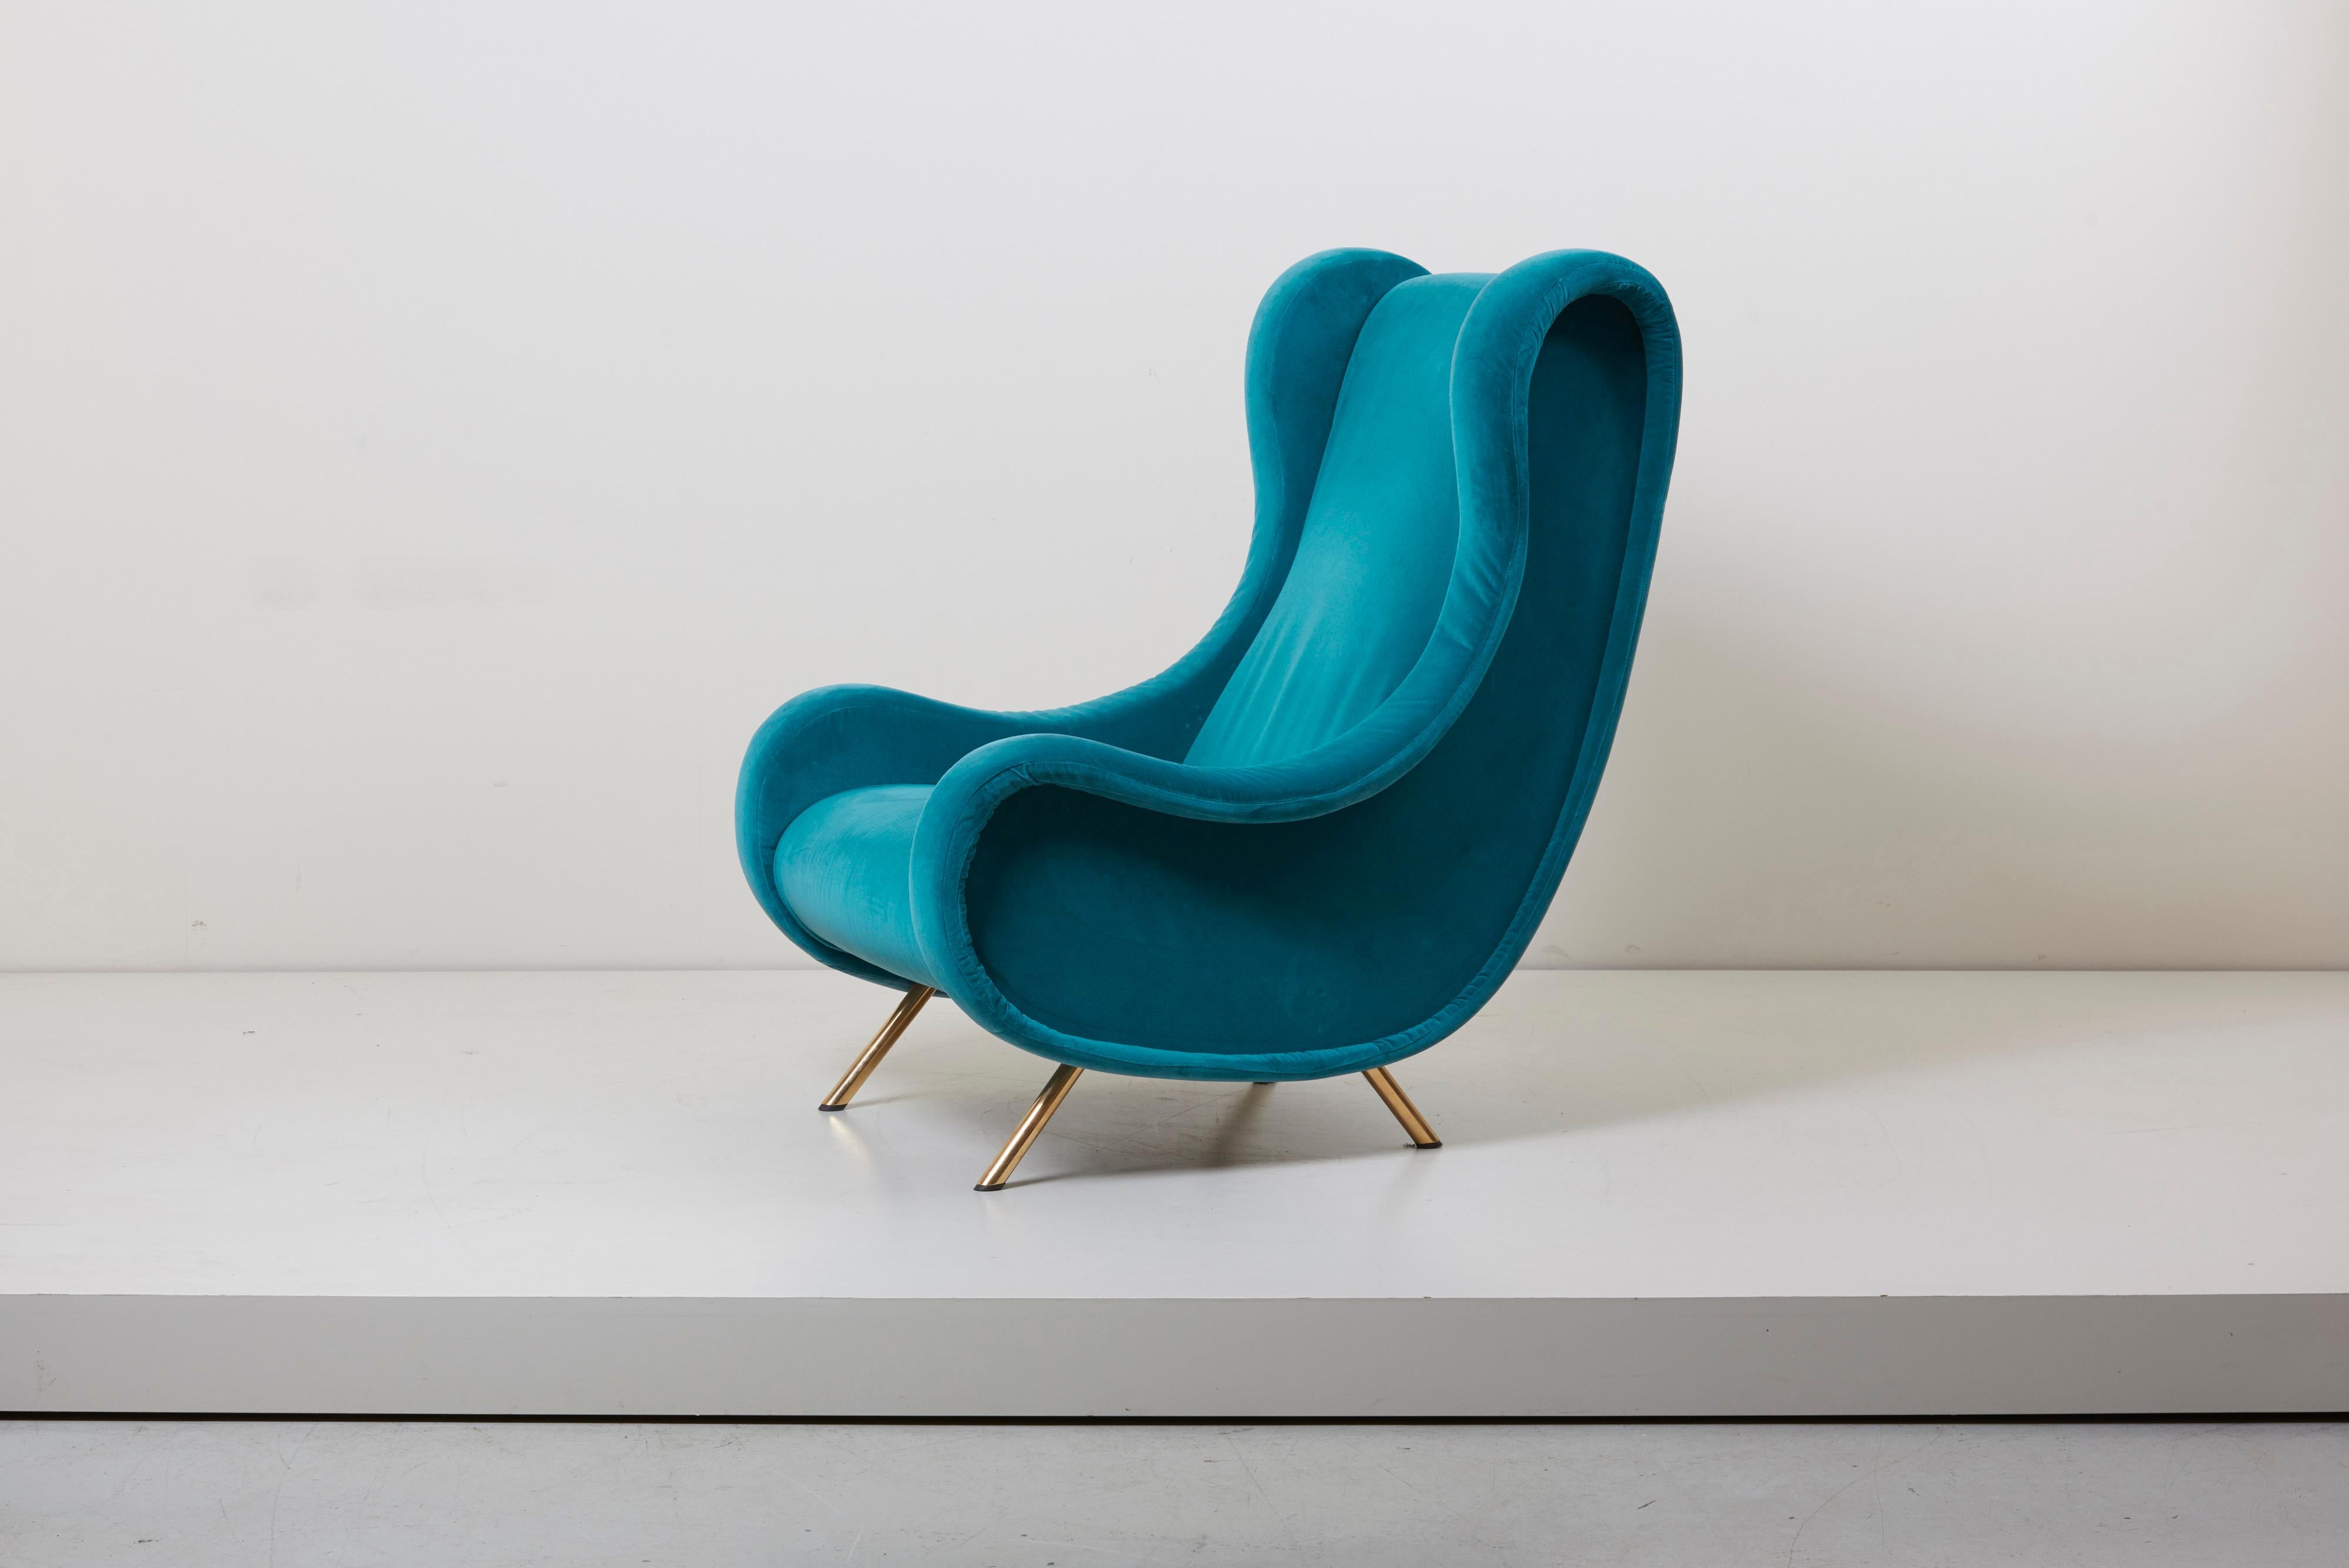 The chair is the Classic senior by Marco Zanuso for Arflex and retain their original legs and hardware. Presented at the Compaso d'Oro at the 1955 Milan Trienale.